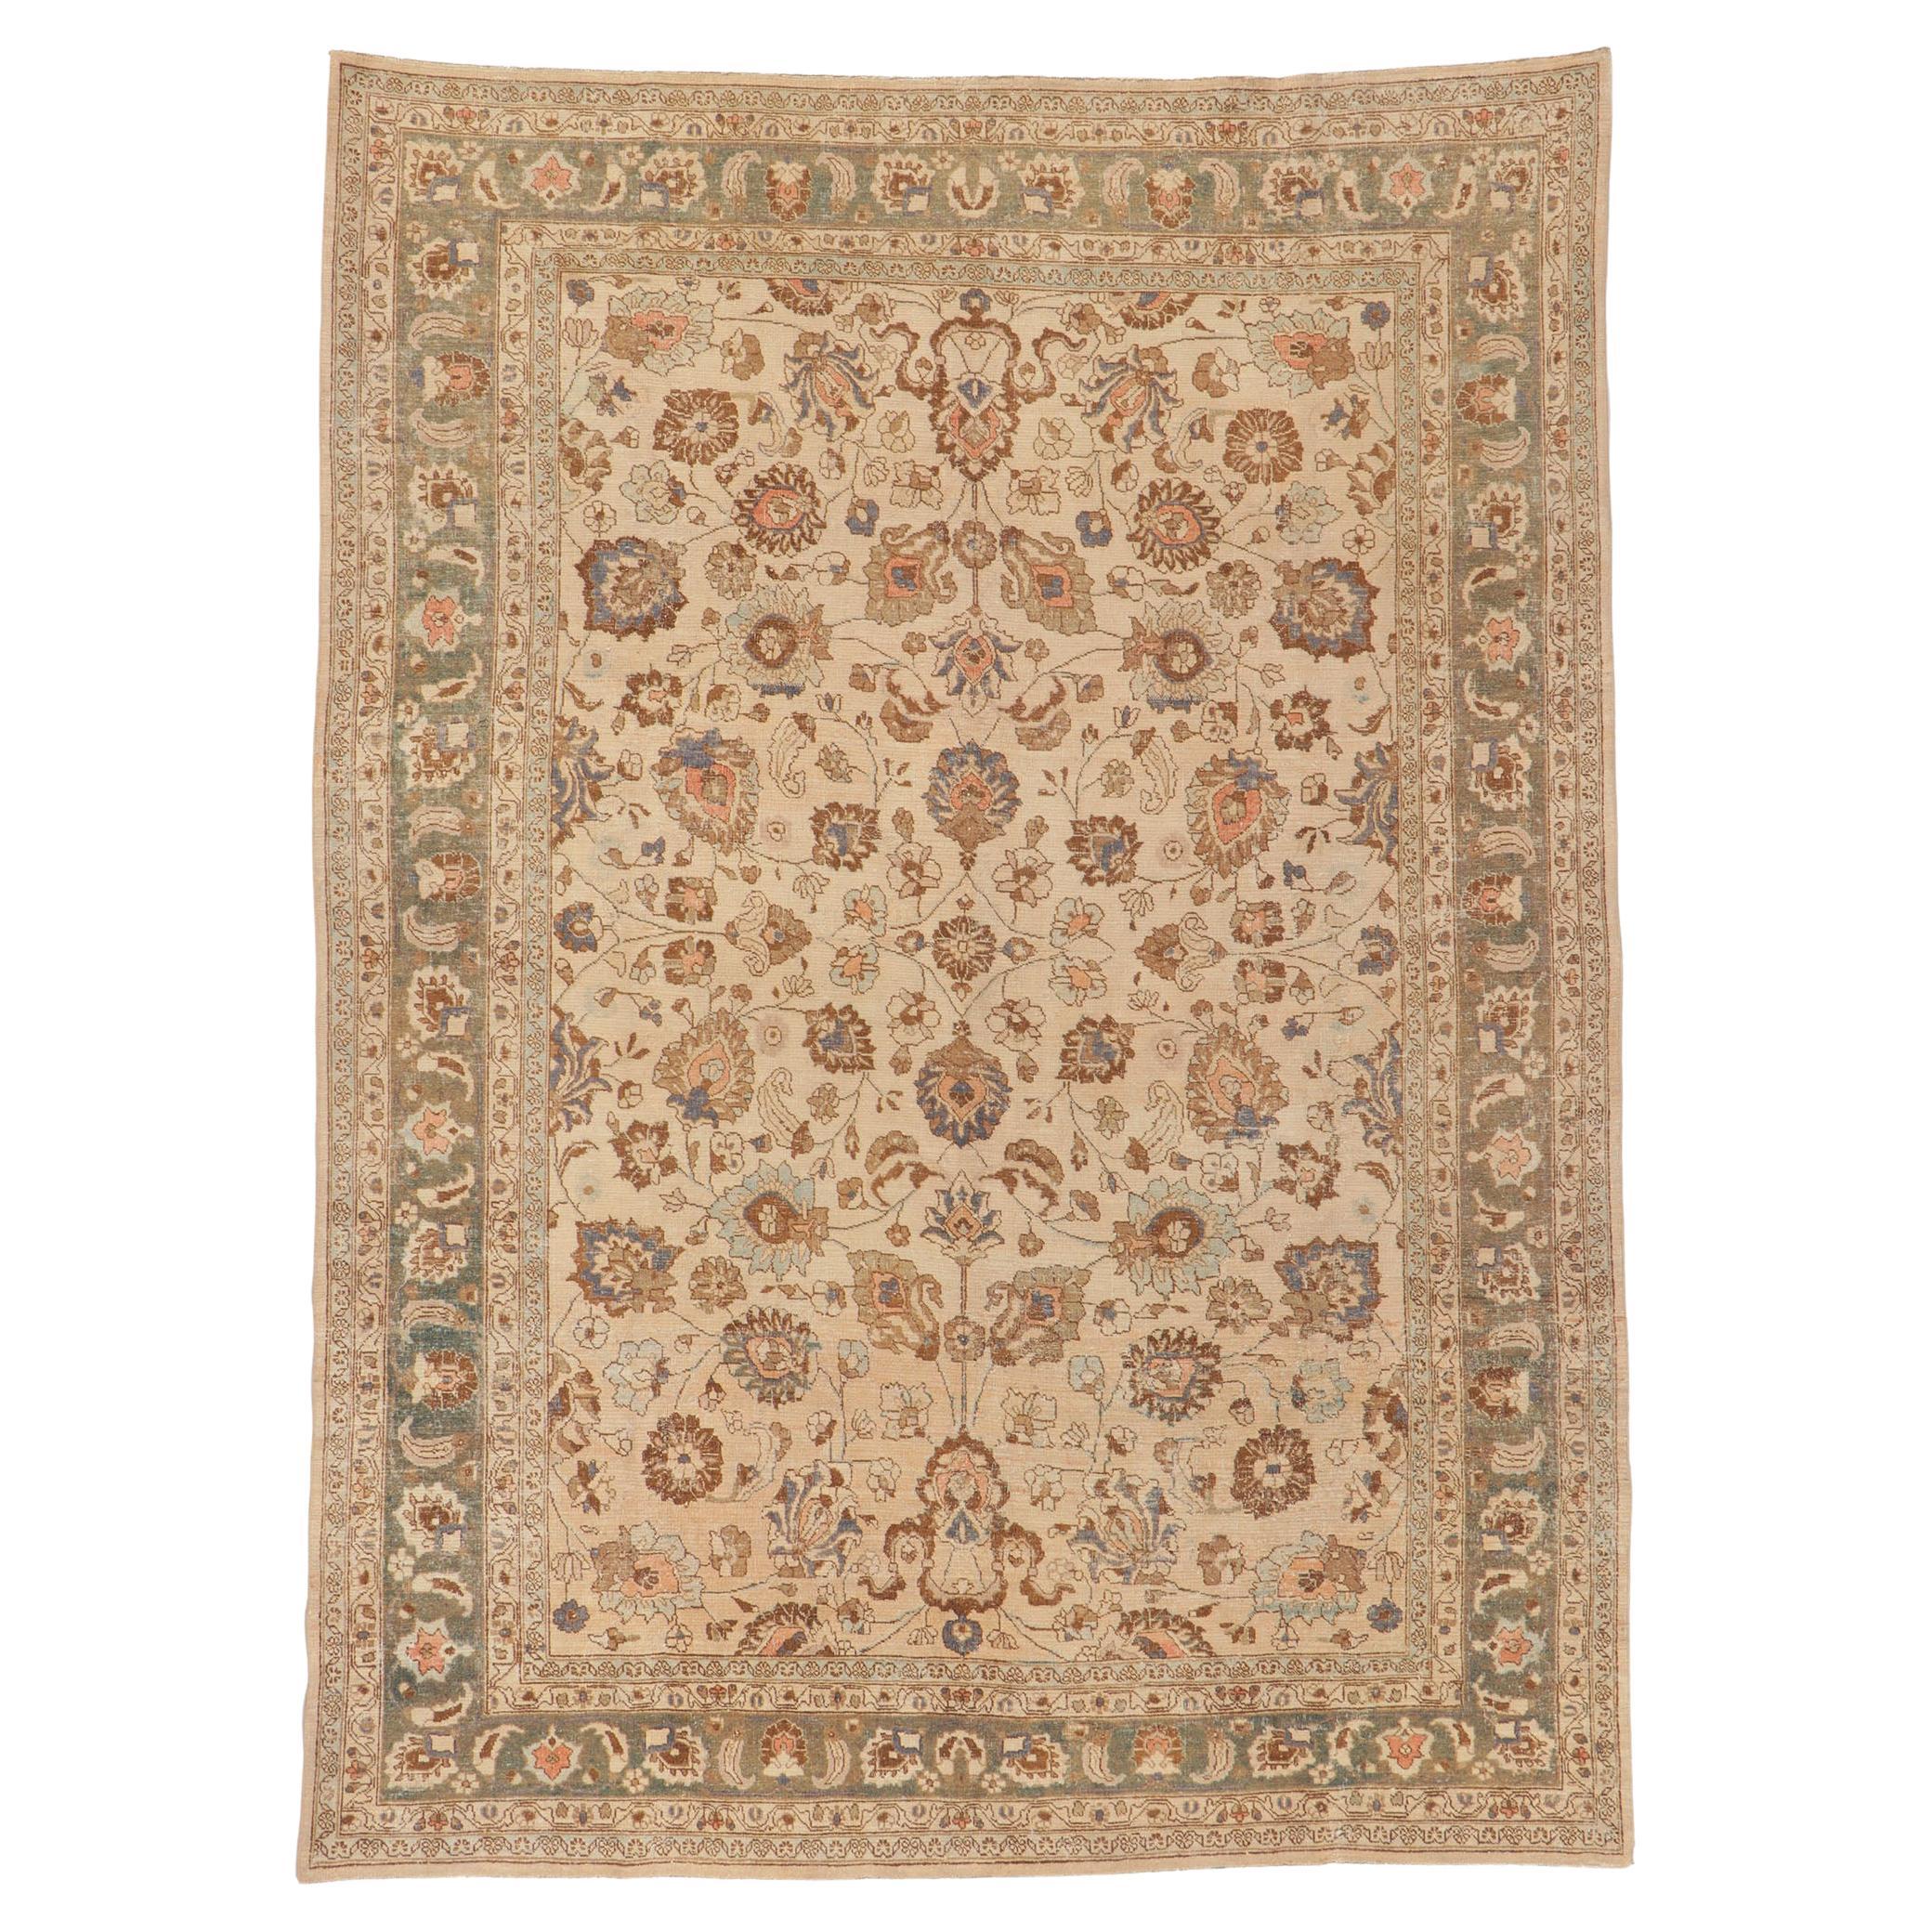 Antique Persian Khorassan Rug with Modern Grandmillennial Style For Sale